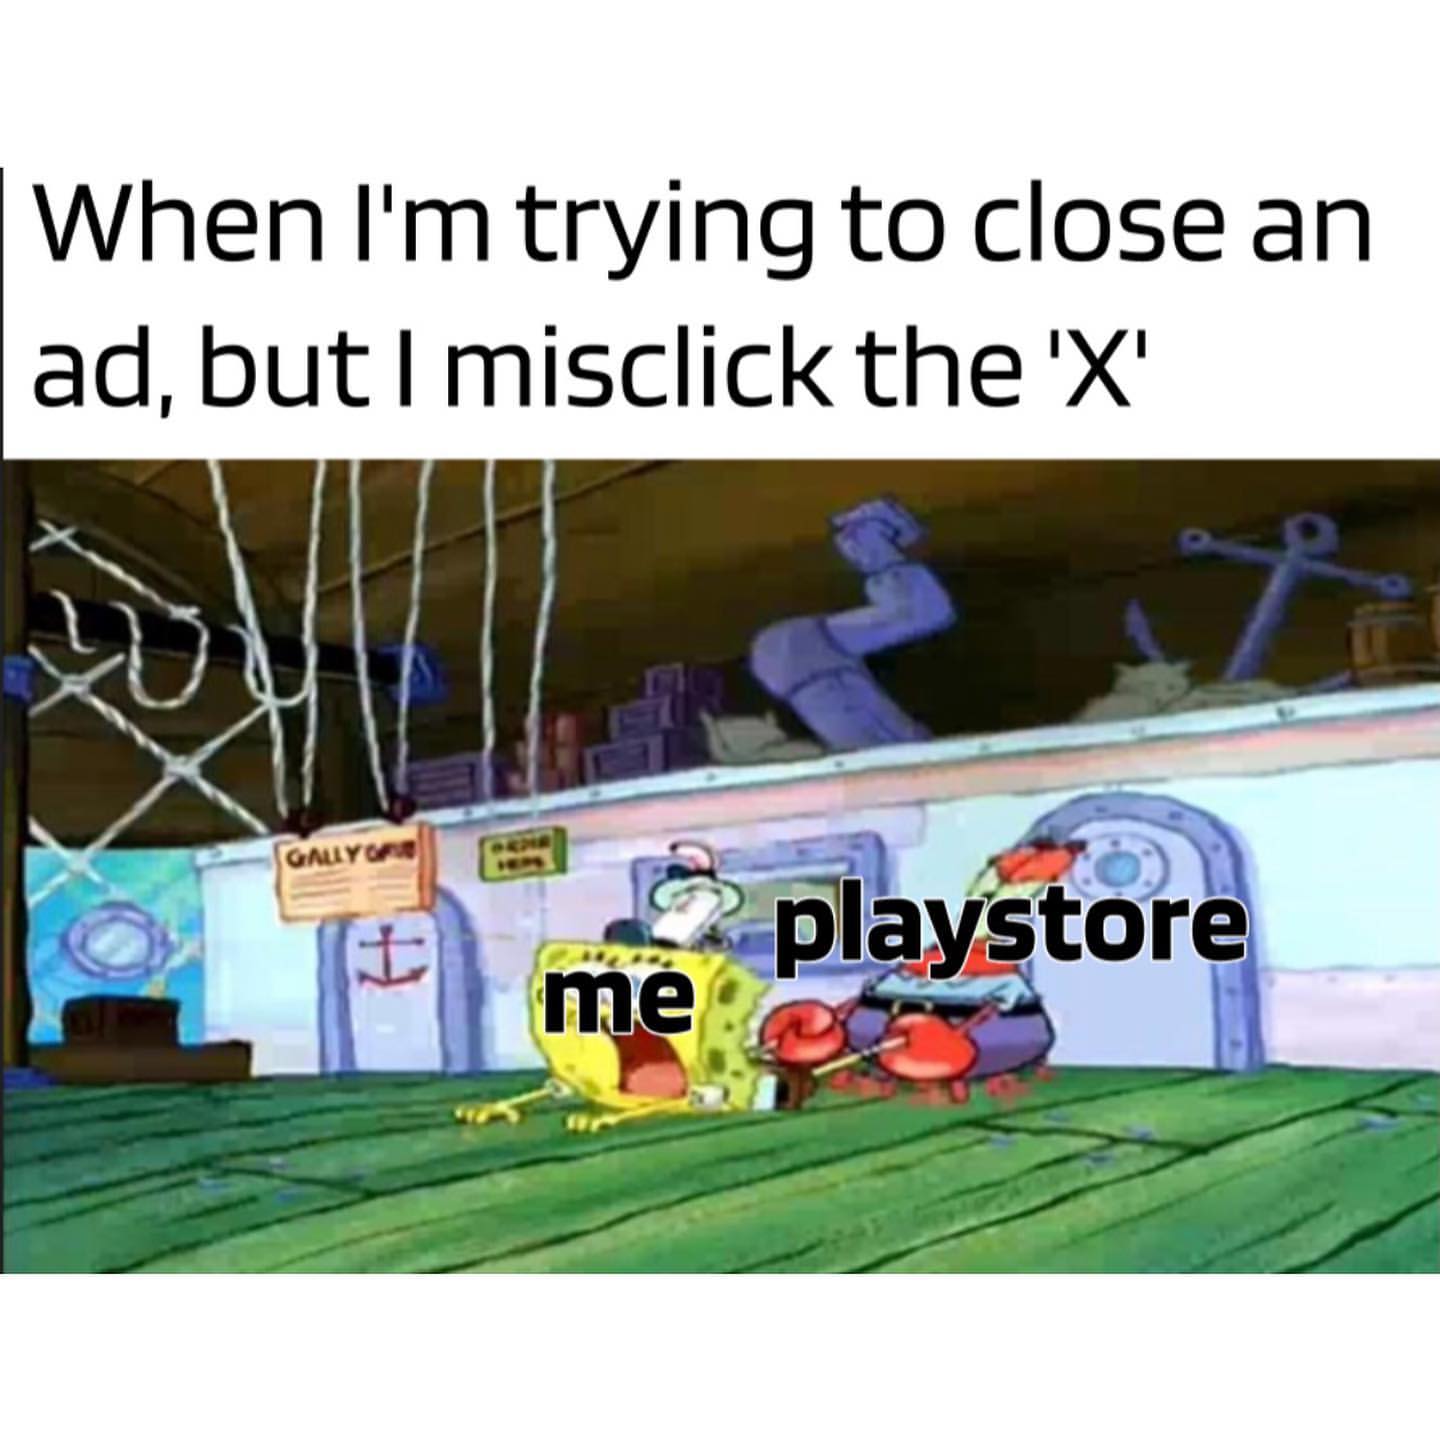 When I'm trying to close an ad, but I misclick the "x". Me. Playstore.